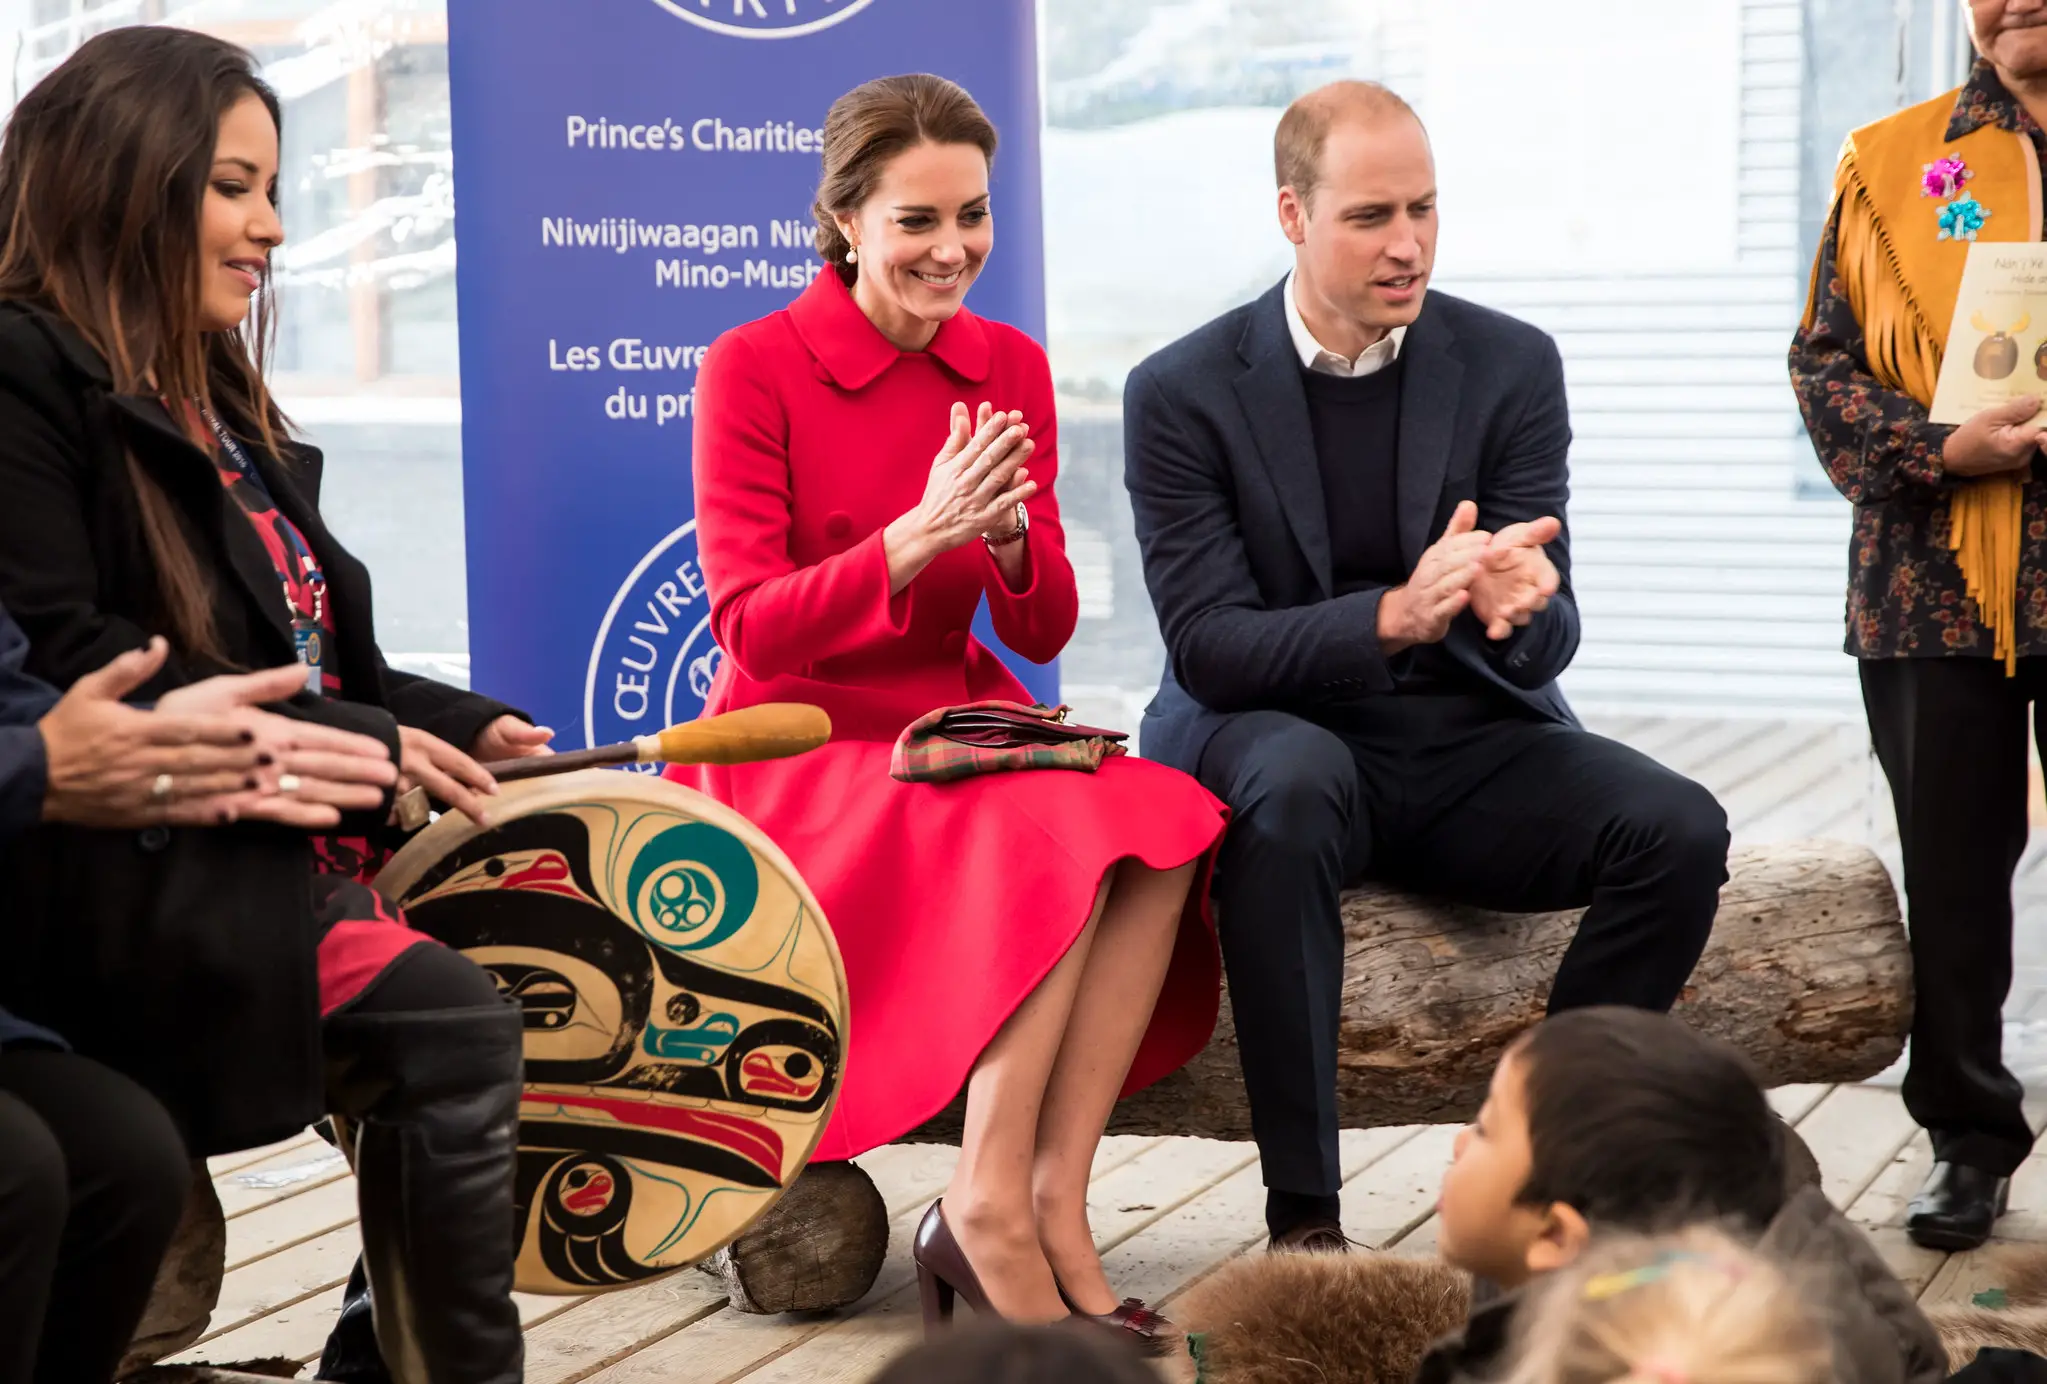 The Duke and Duchess of cambridge at story time in yukon